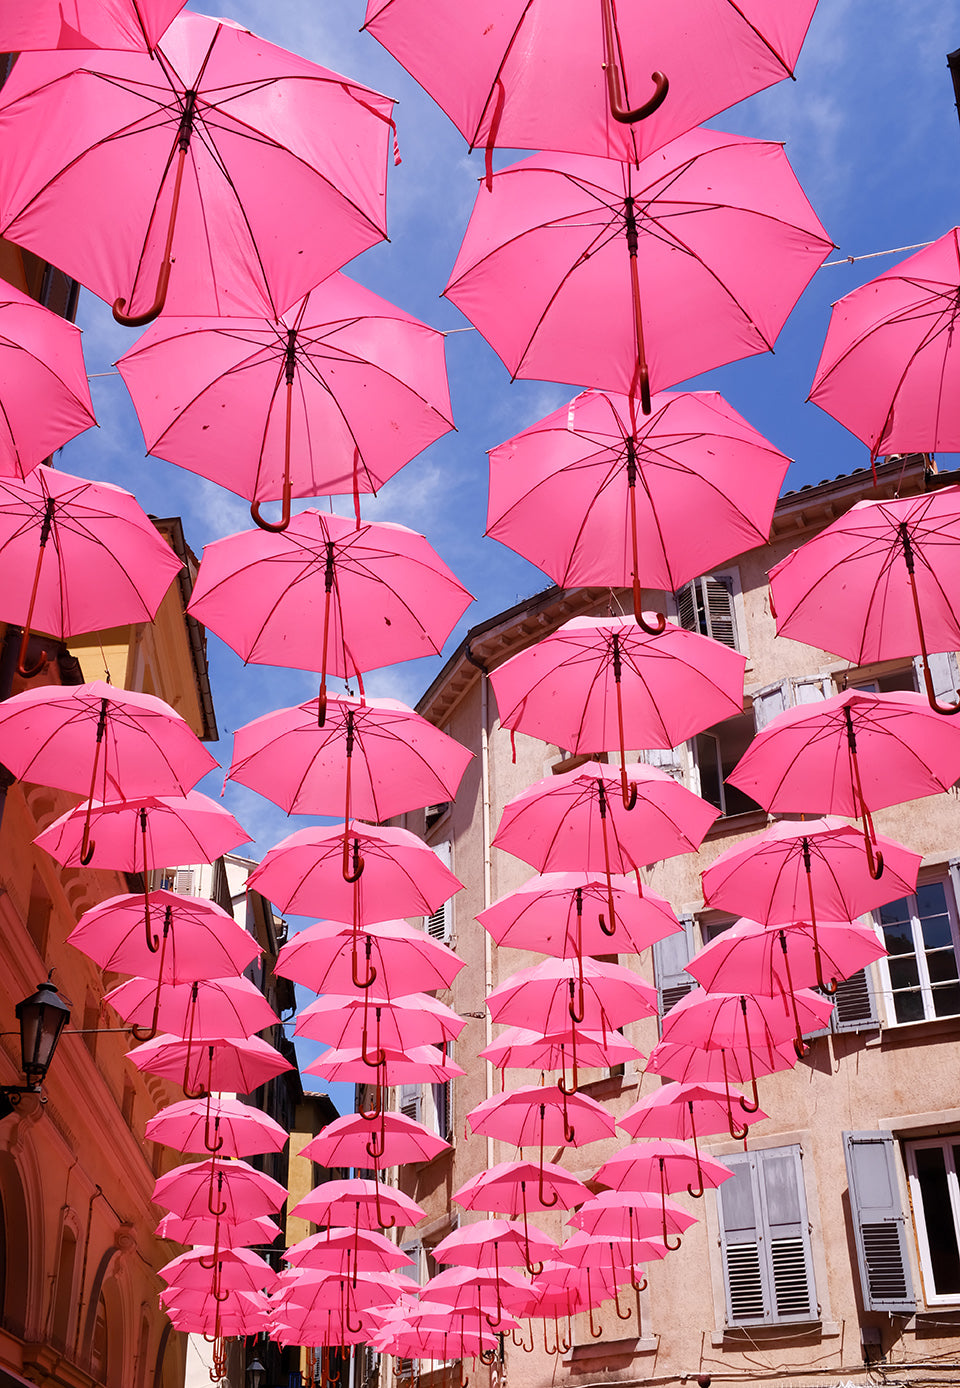 Pink Umbrellas in Grasse France - Every Day Paris 